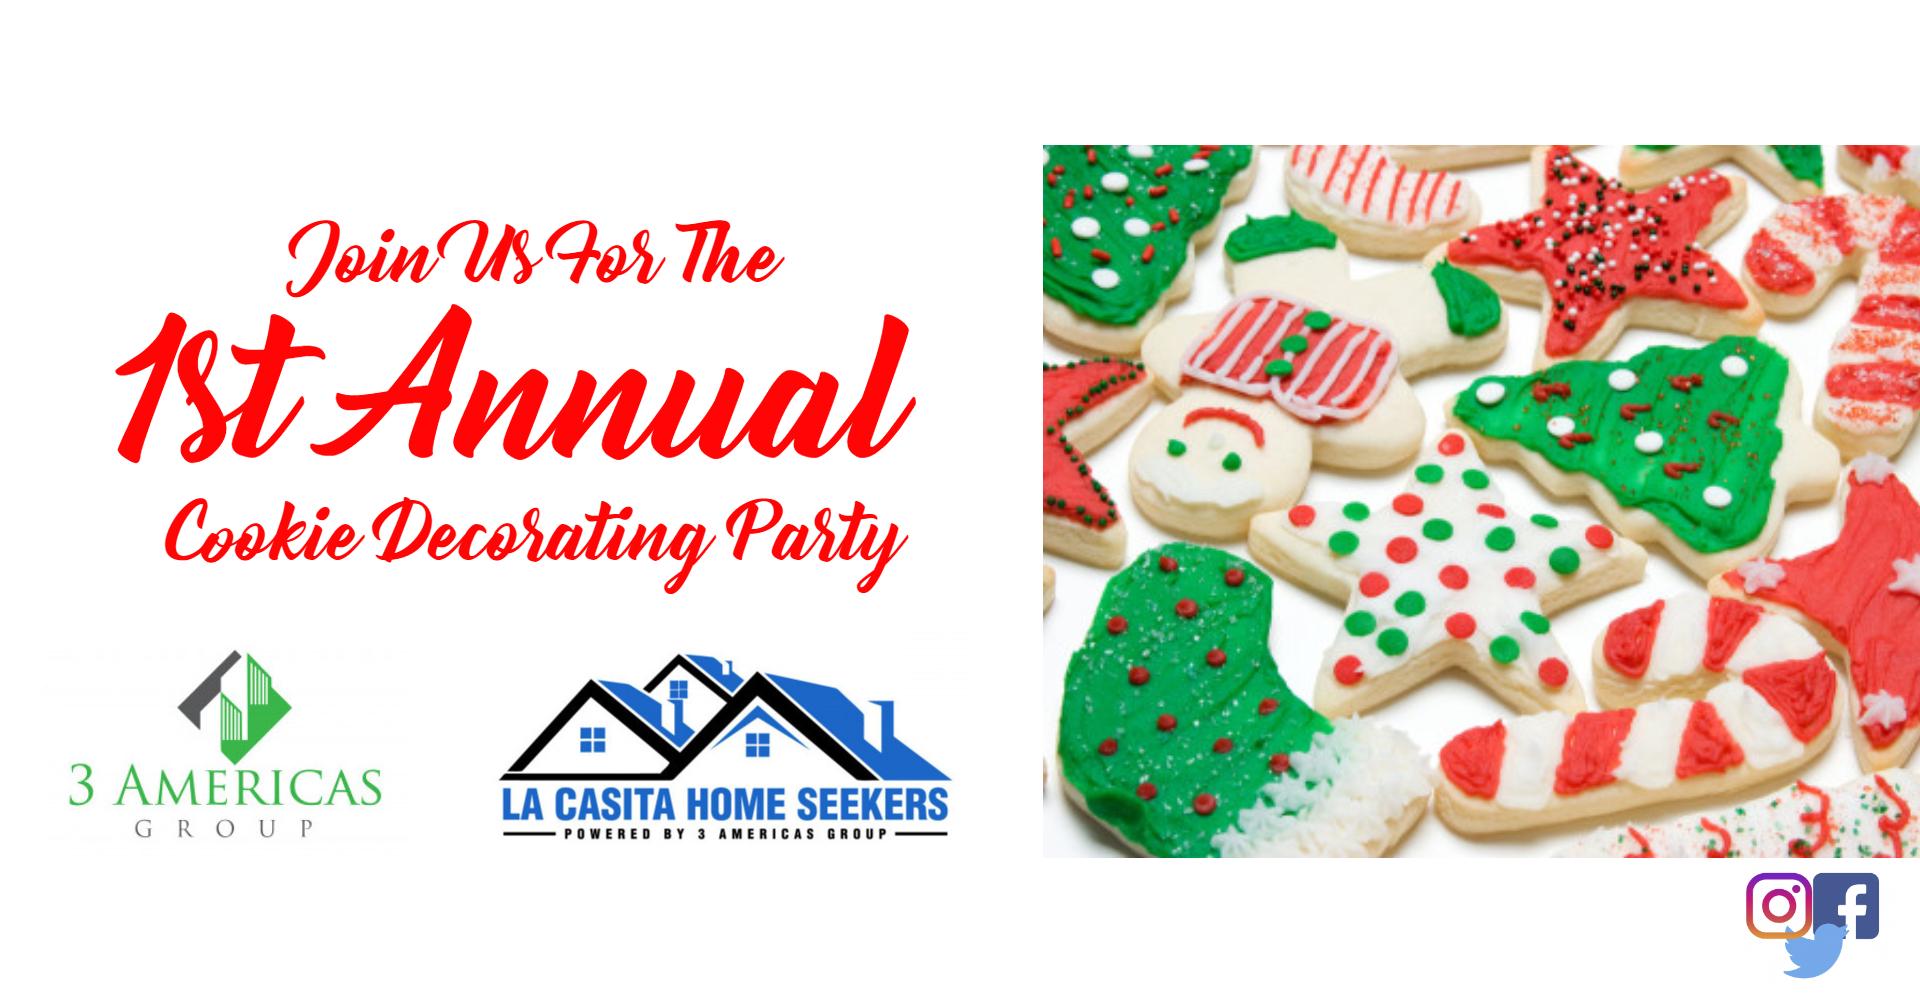 1st Annual Cookie Decorating Party